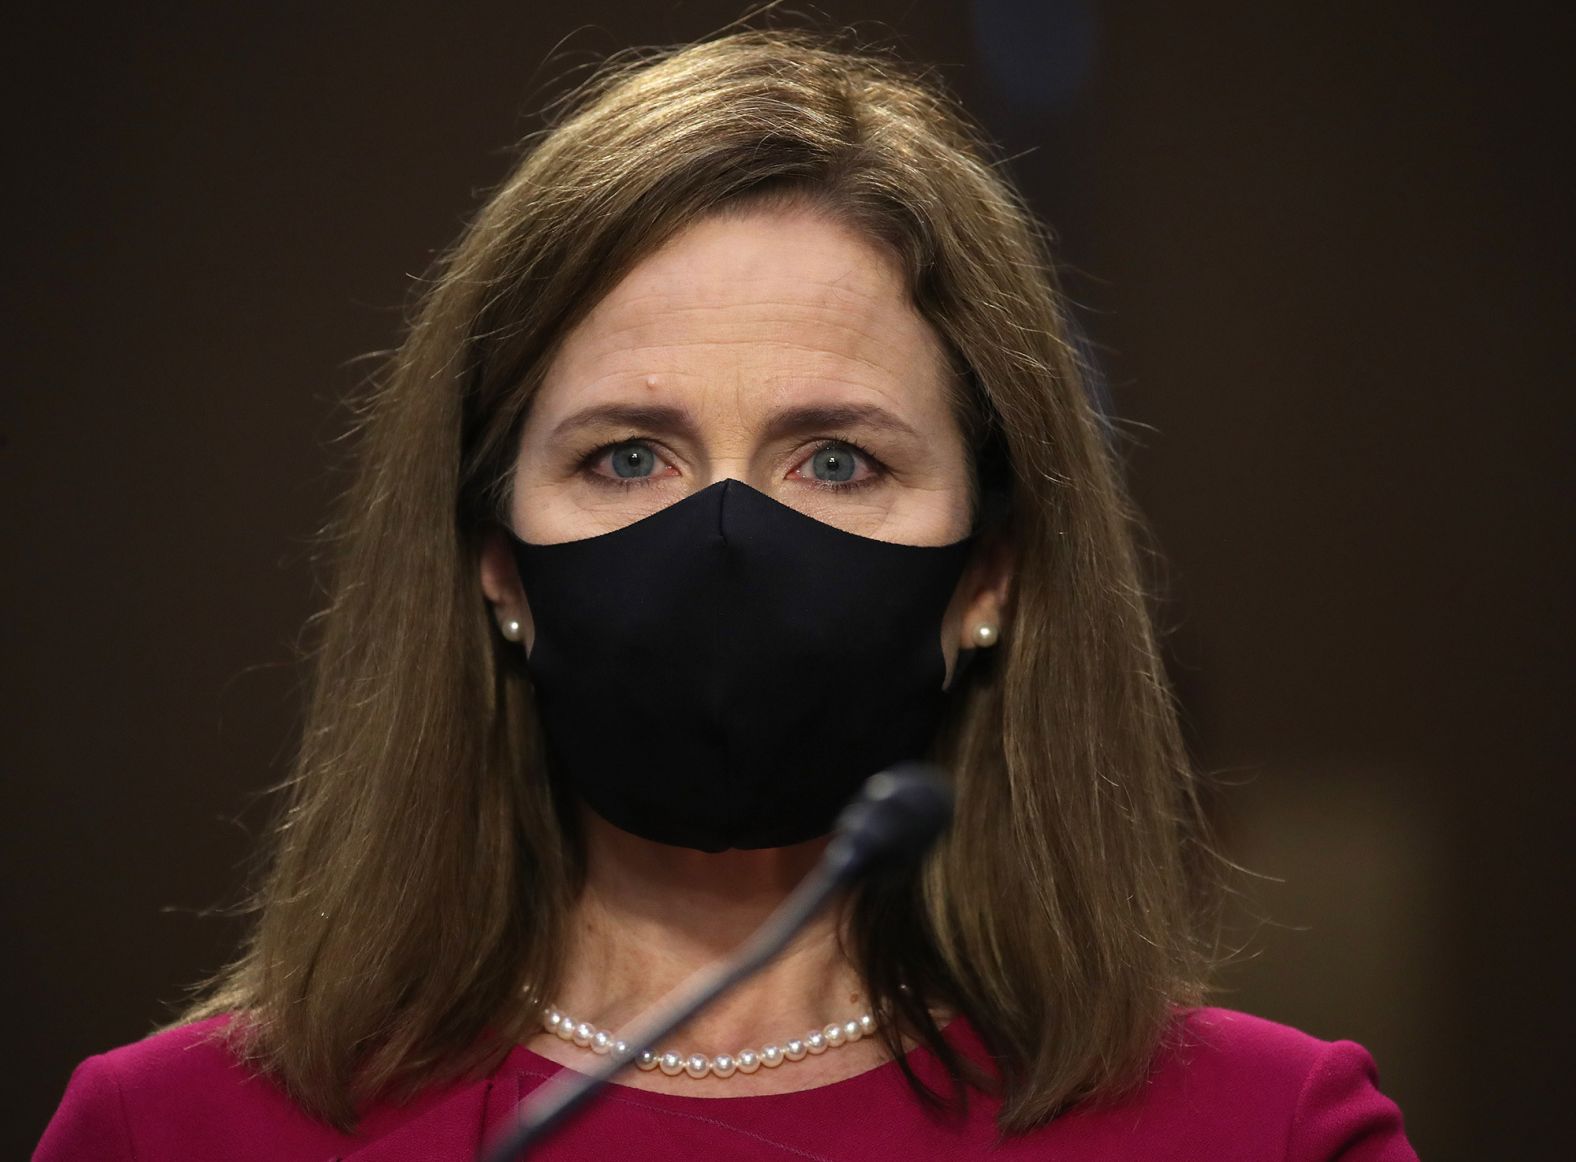 Barrett wears a mask as she arrives at the Hart Senate Office Building on October 12. <a href="index.php?page=&url=https%3A%2F%2Fwww.cnn.com%2Fpolitics%2Flive-news%2Famy-coney-barrett-hearing-10-12-20%2Fh_b8f6e4448630c2dfd62a224306810a6c" target="_blank">Barrett kept her mask on</a> as she listened to senators kick off the hearing.